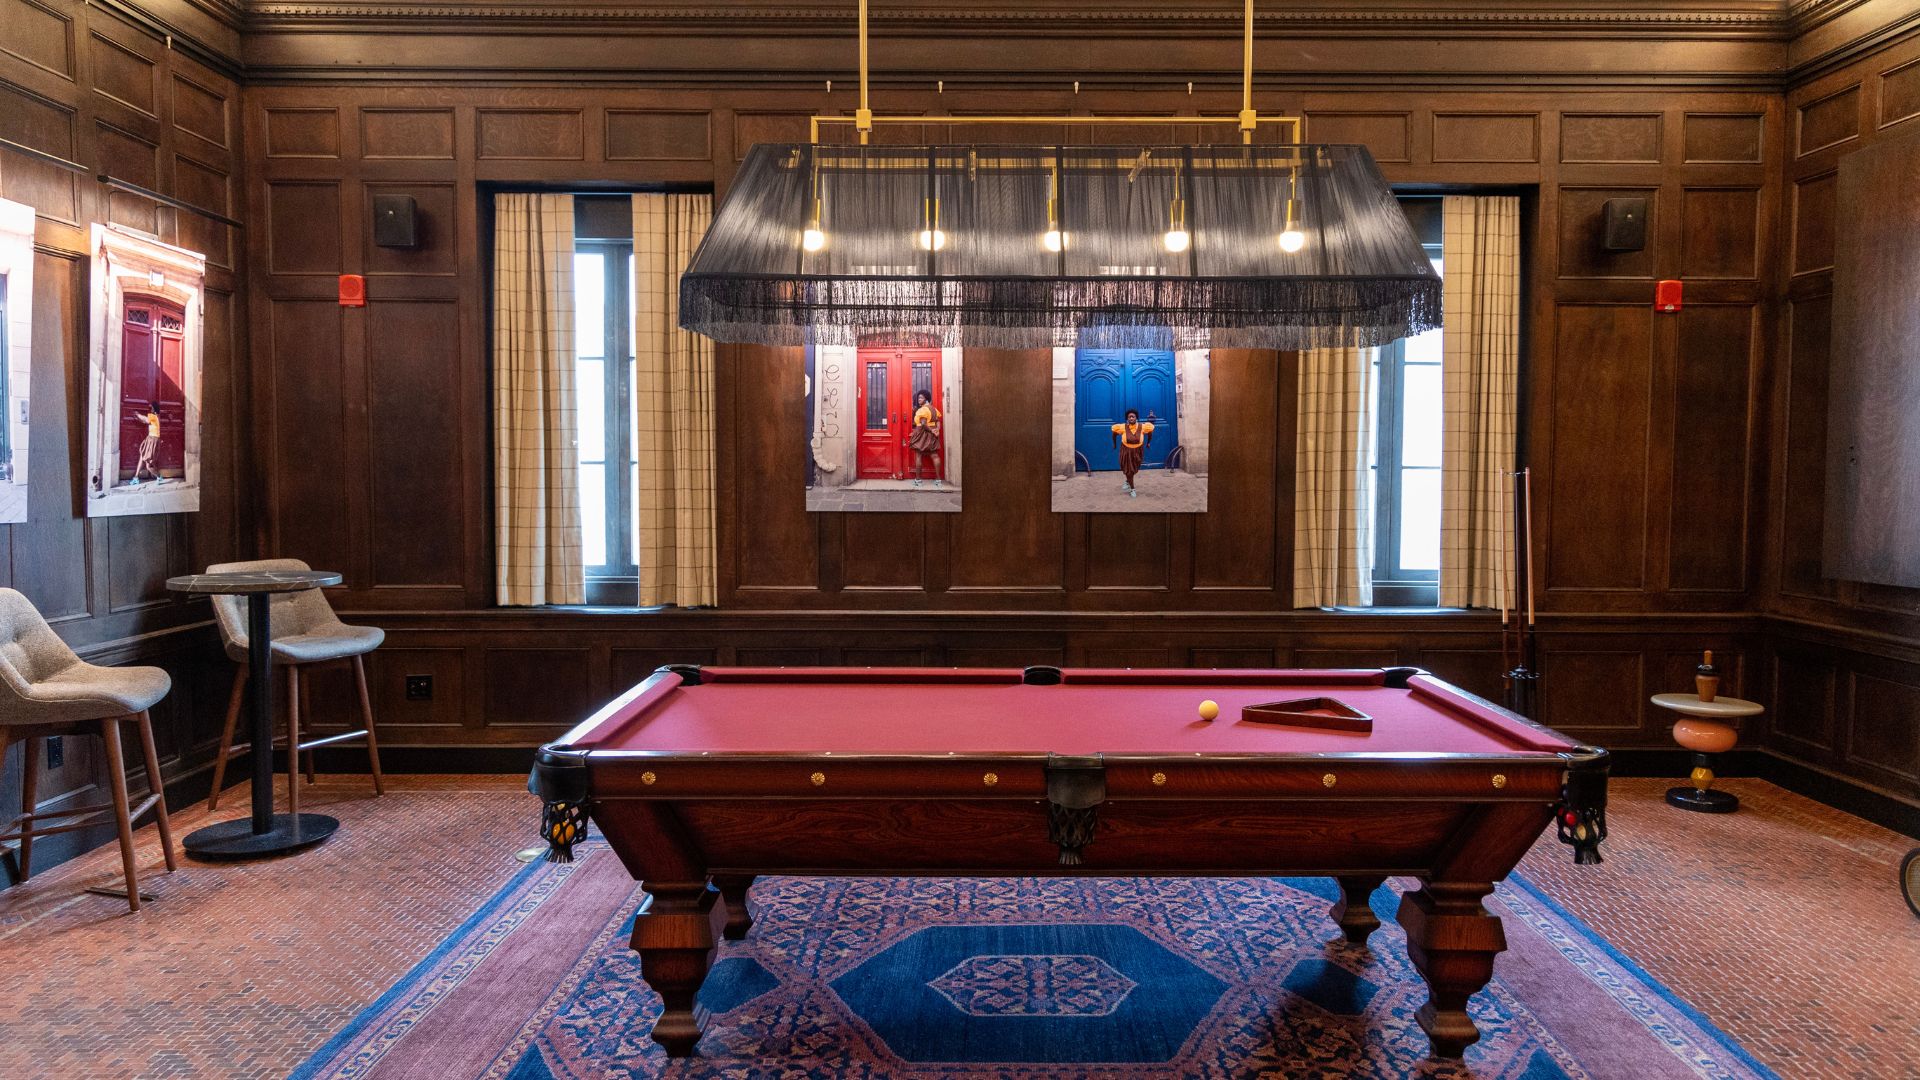 The billiards room at 21c Museum Hotel St. Louis features art by Quinn Antonio Briceño and Yvonne Osei.